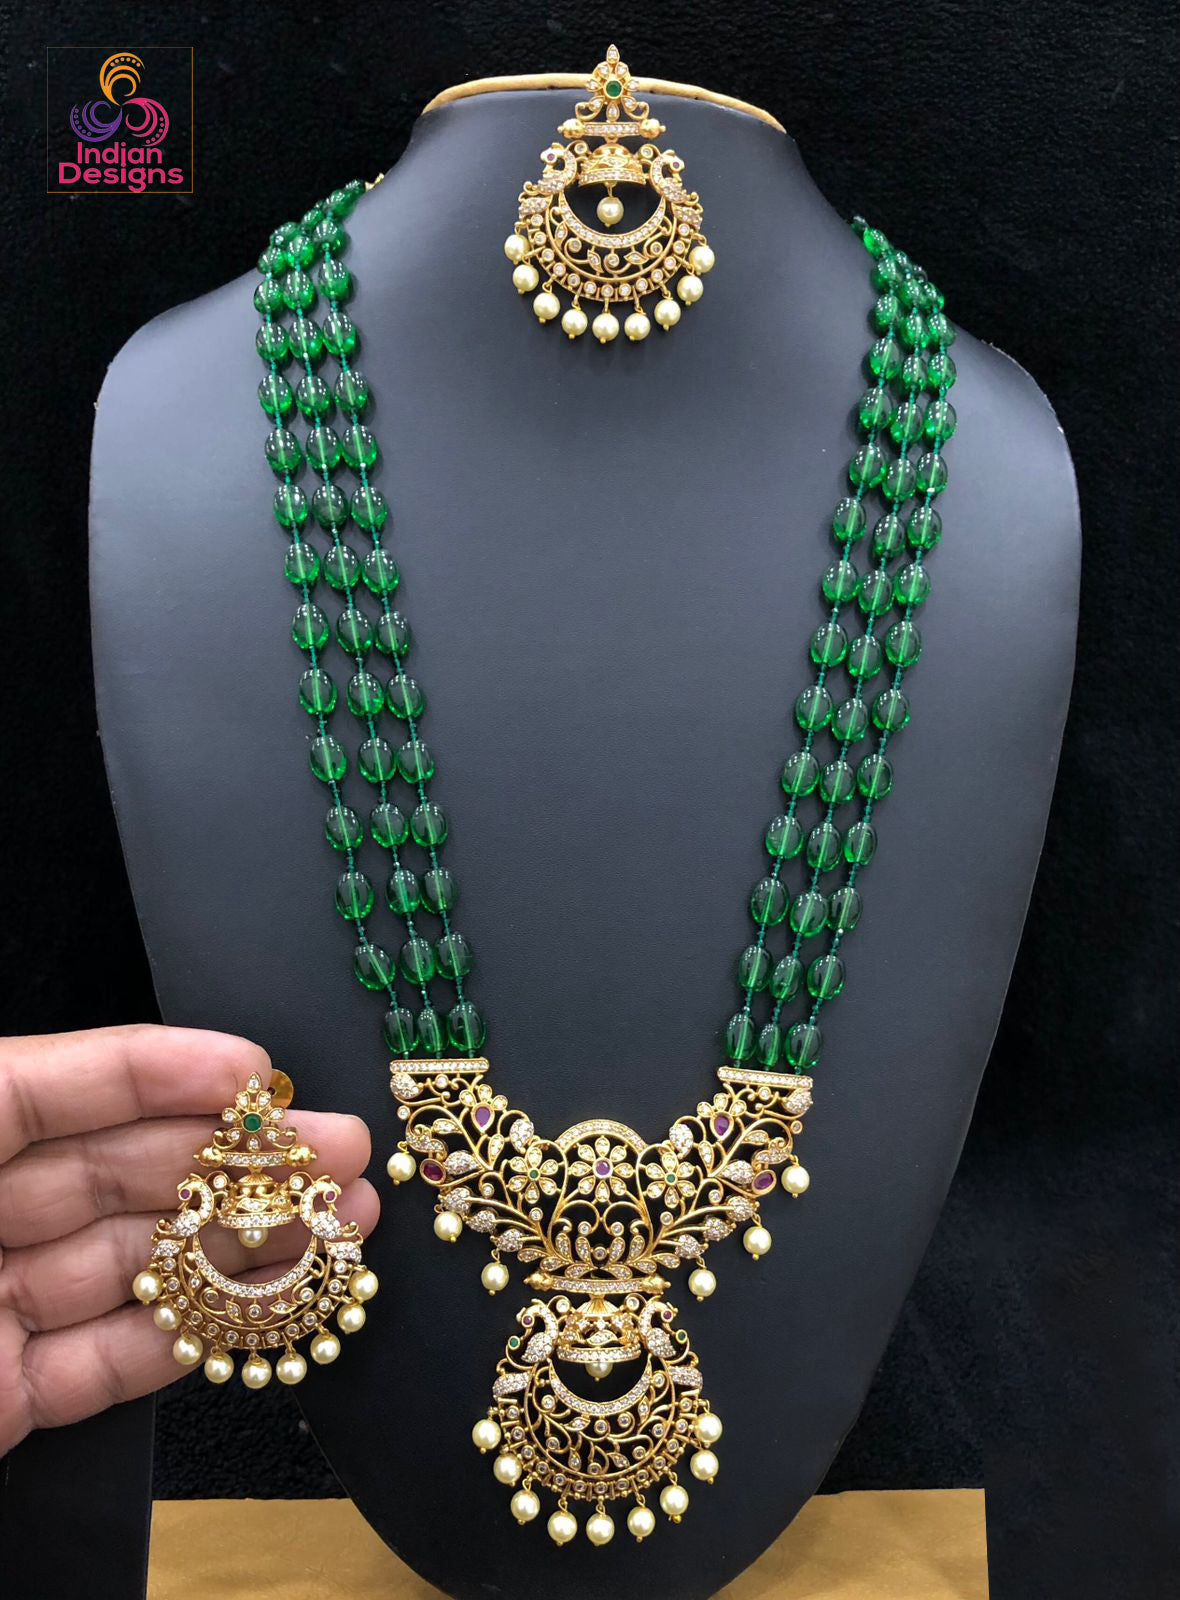 Surat Diamond 4 Line 276cts Real Natural Green Emerald Beads Necklace for  Women (276cts EMR Neck) Emerald Stone Necklace Price in India - Buy Surat  Diamond 4 Line 276cts Real Natural Green